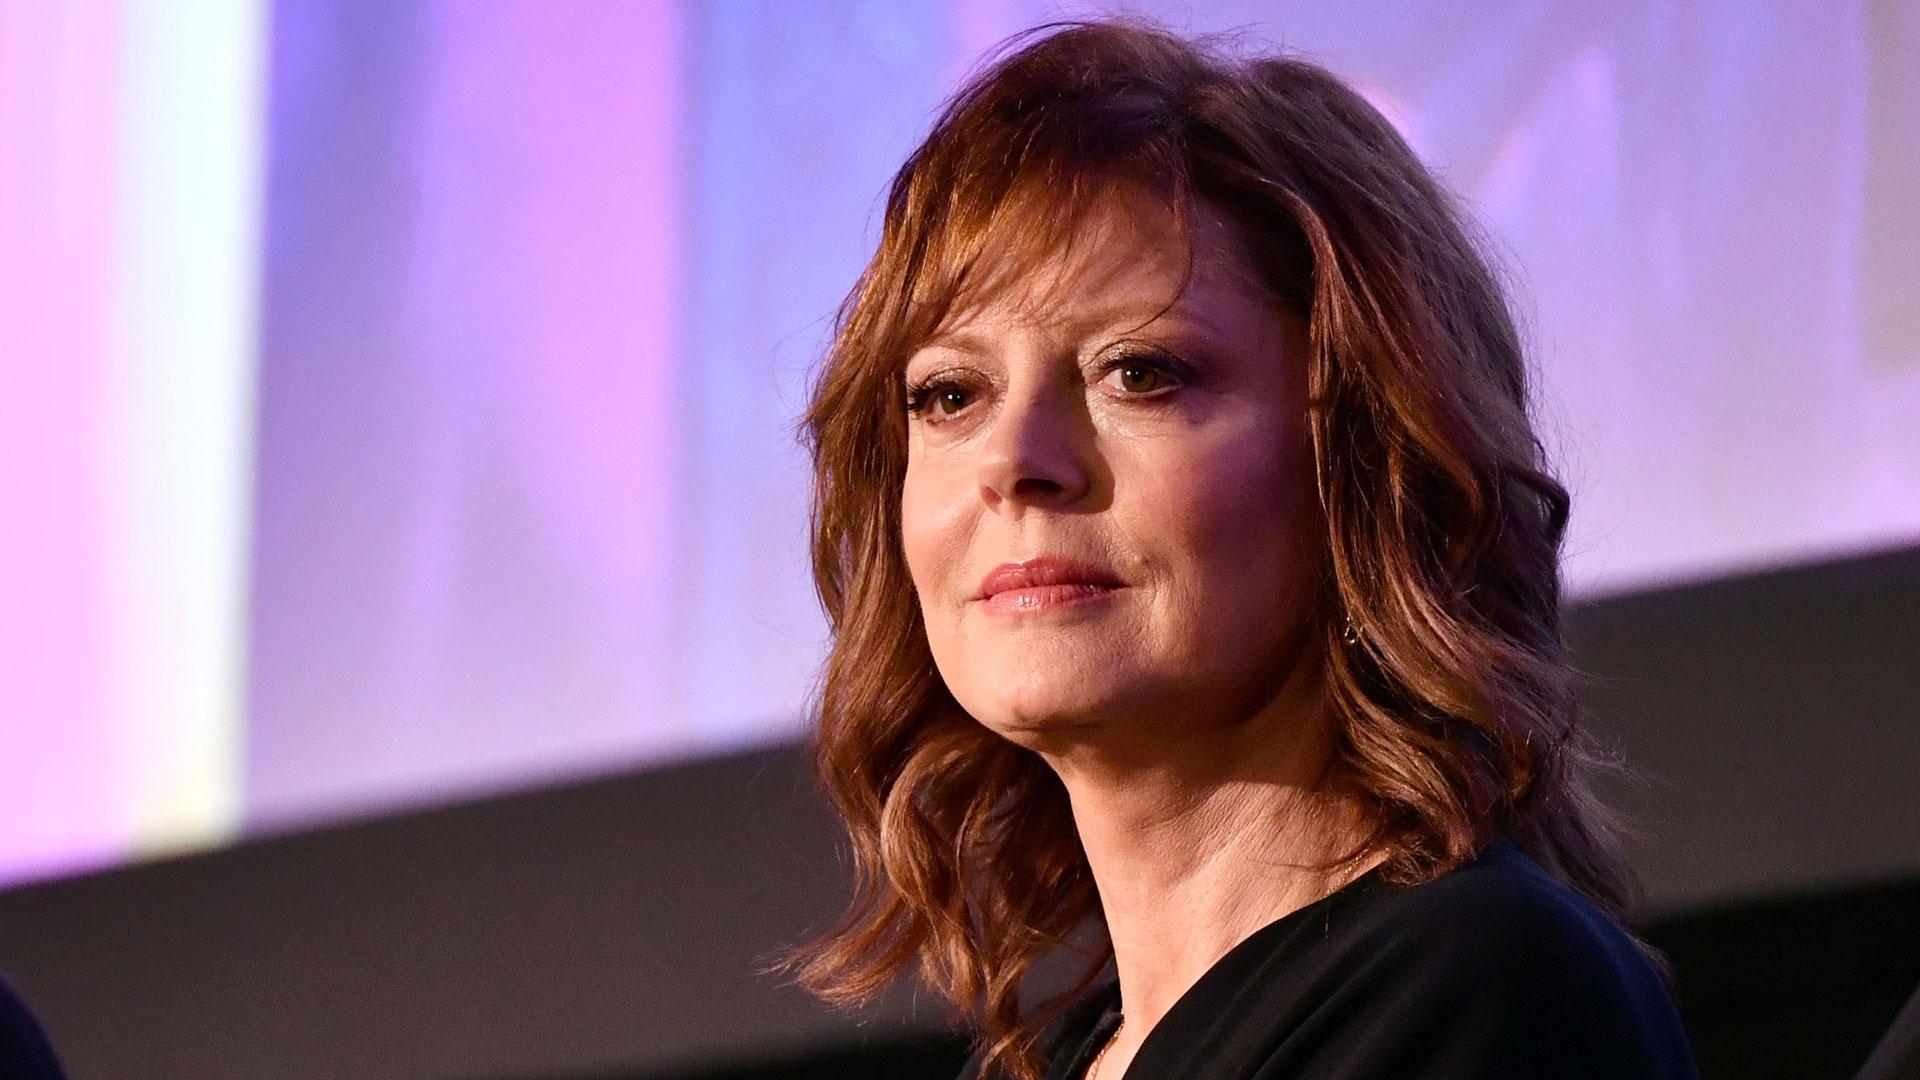 Susan Sarandon: Hedy Lamarr was so strong, as well as brilliant